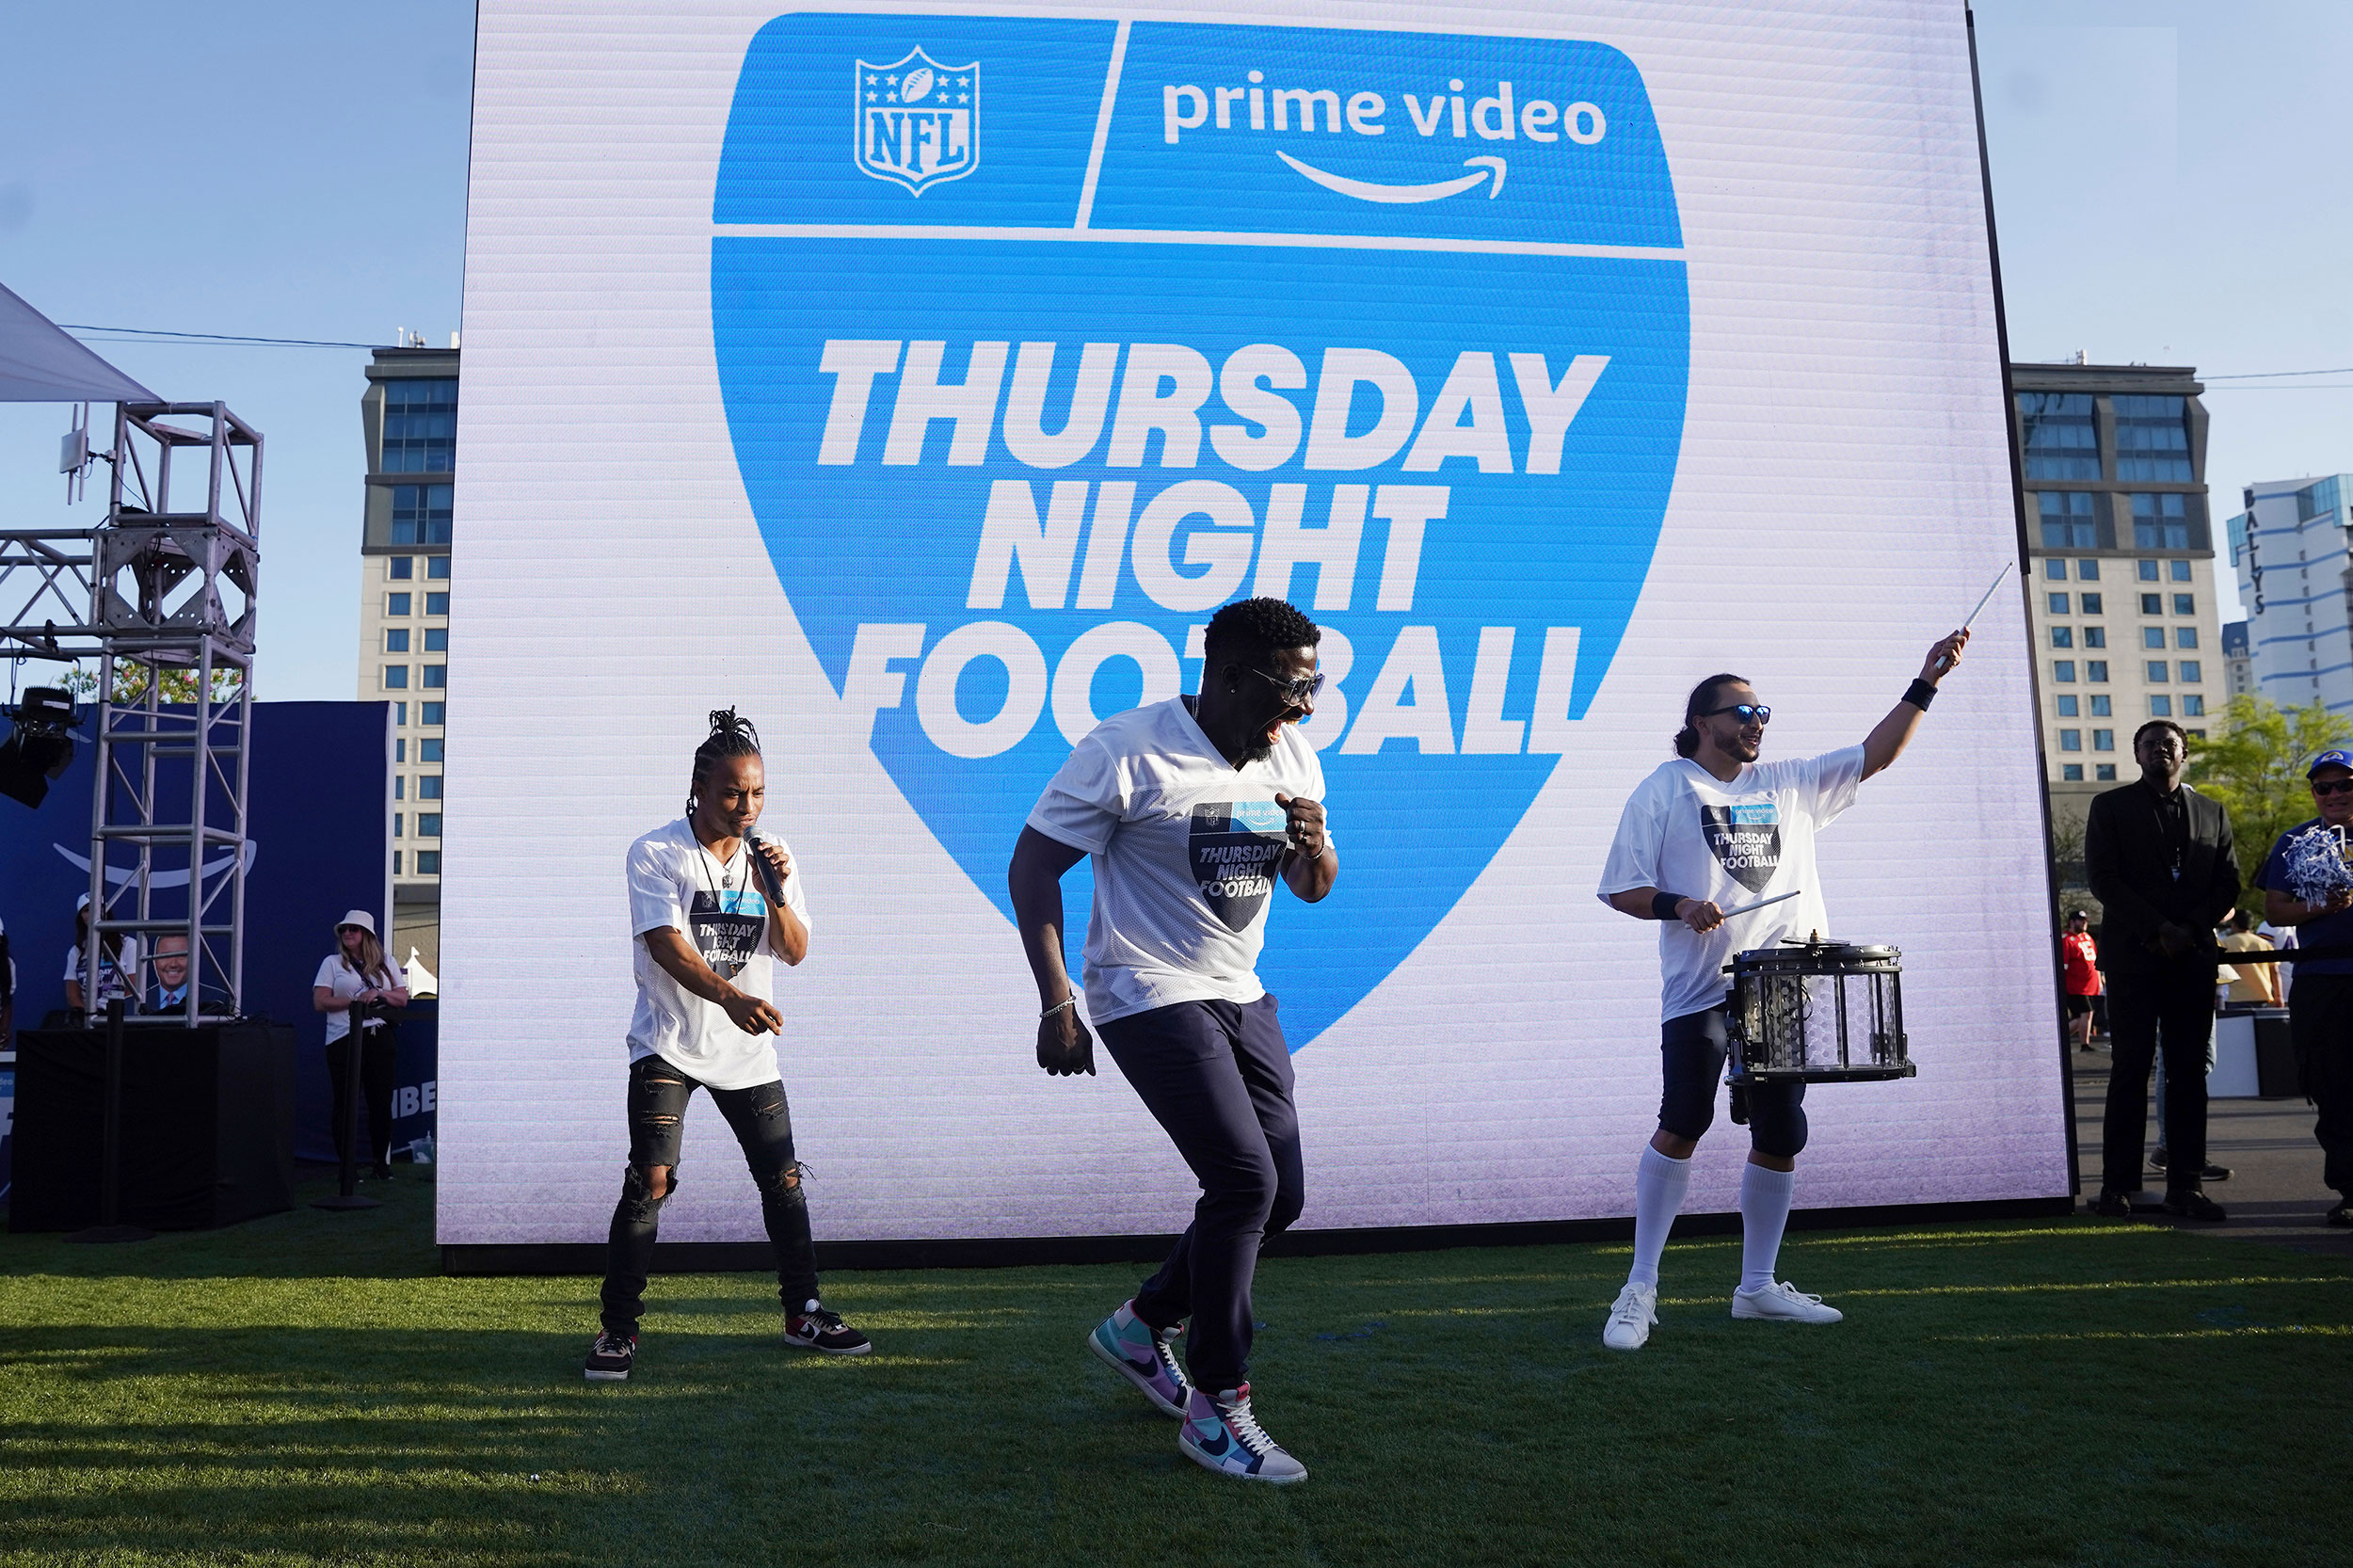 Thursday Night Football: NFL Game today and where can you watch it